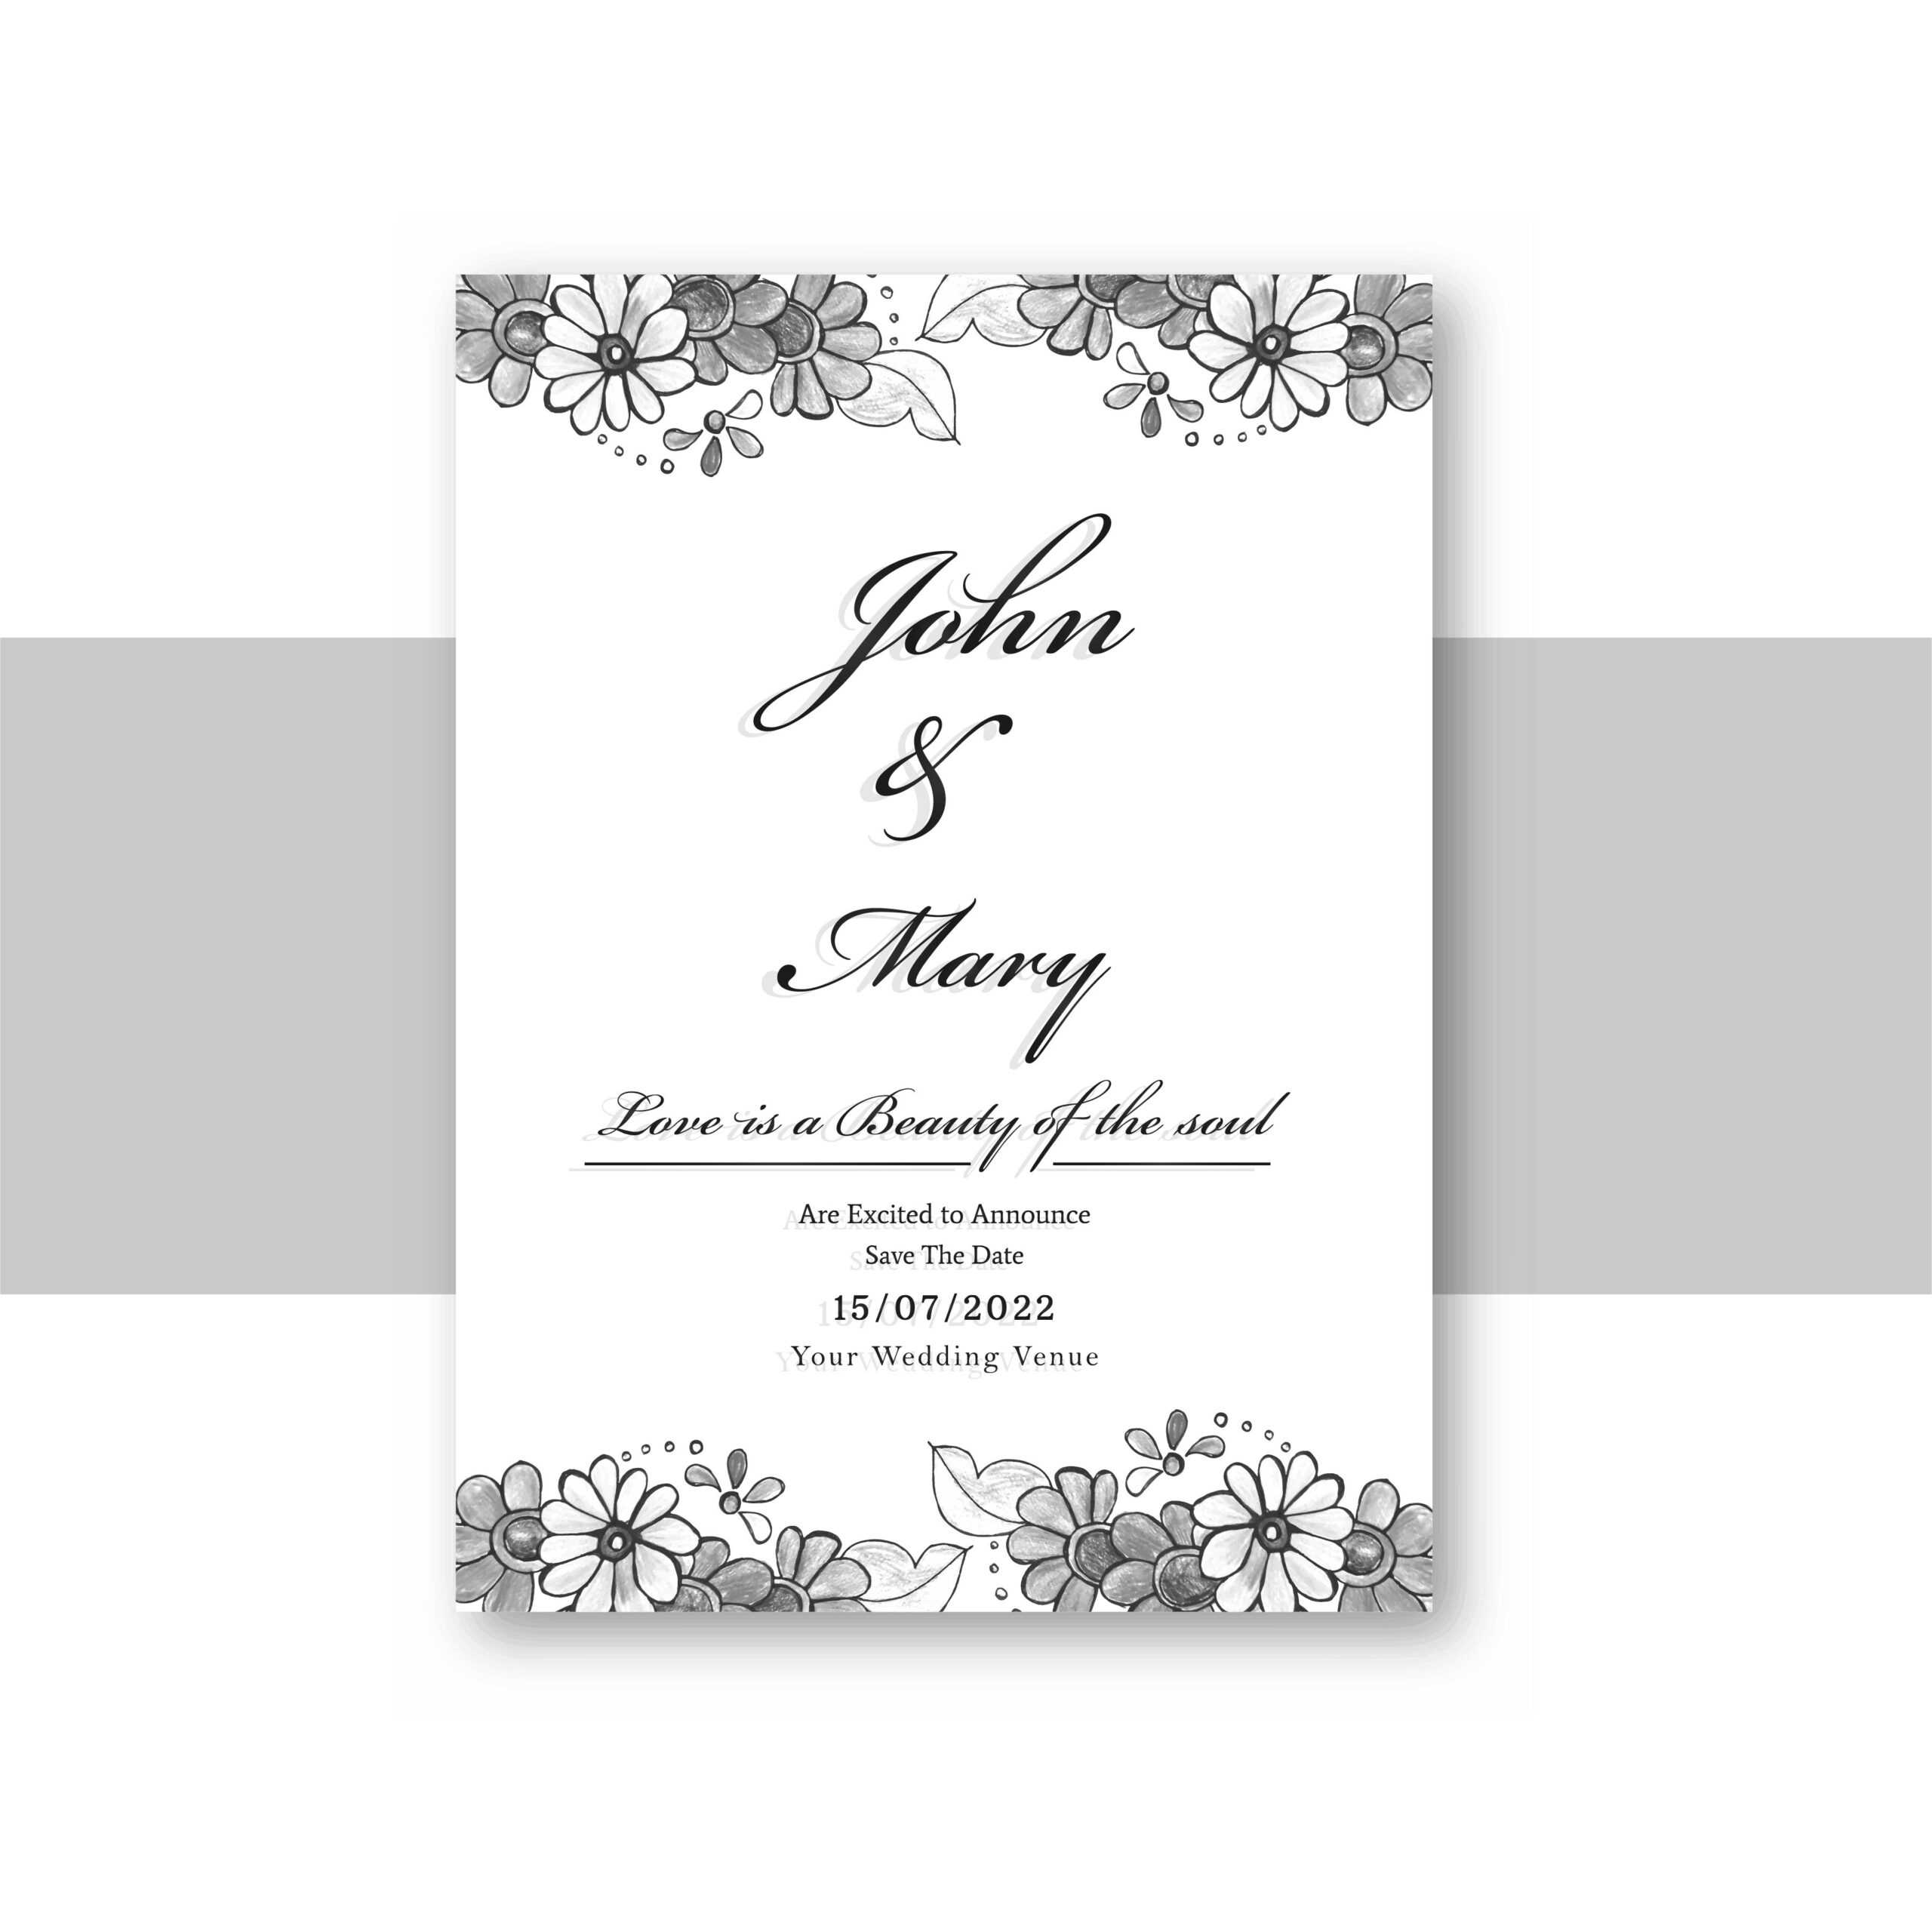 Beautiful Wedding Invitation Card Template With Decorative With Regard To Invitation Cards Templates For Marriage